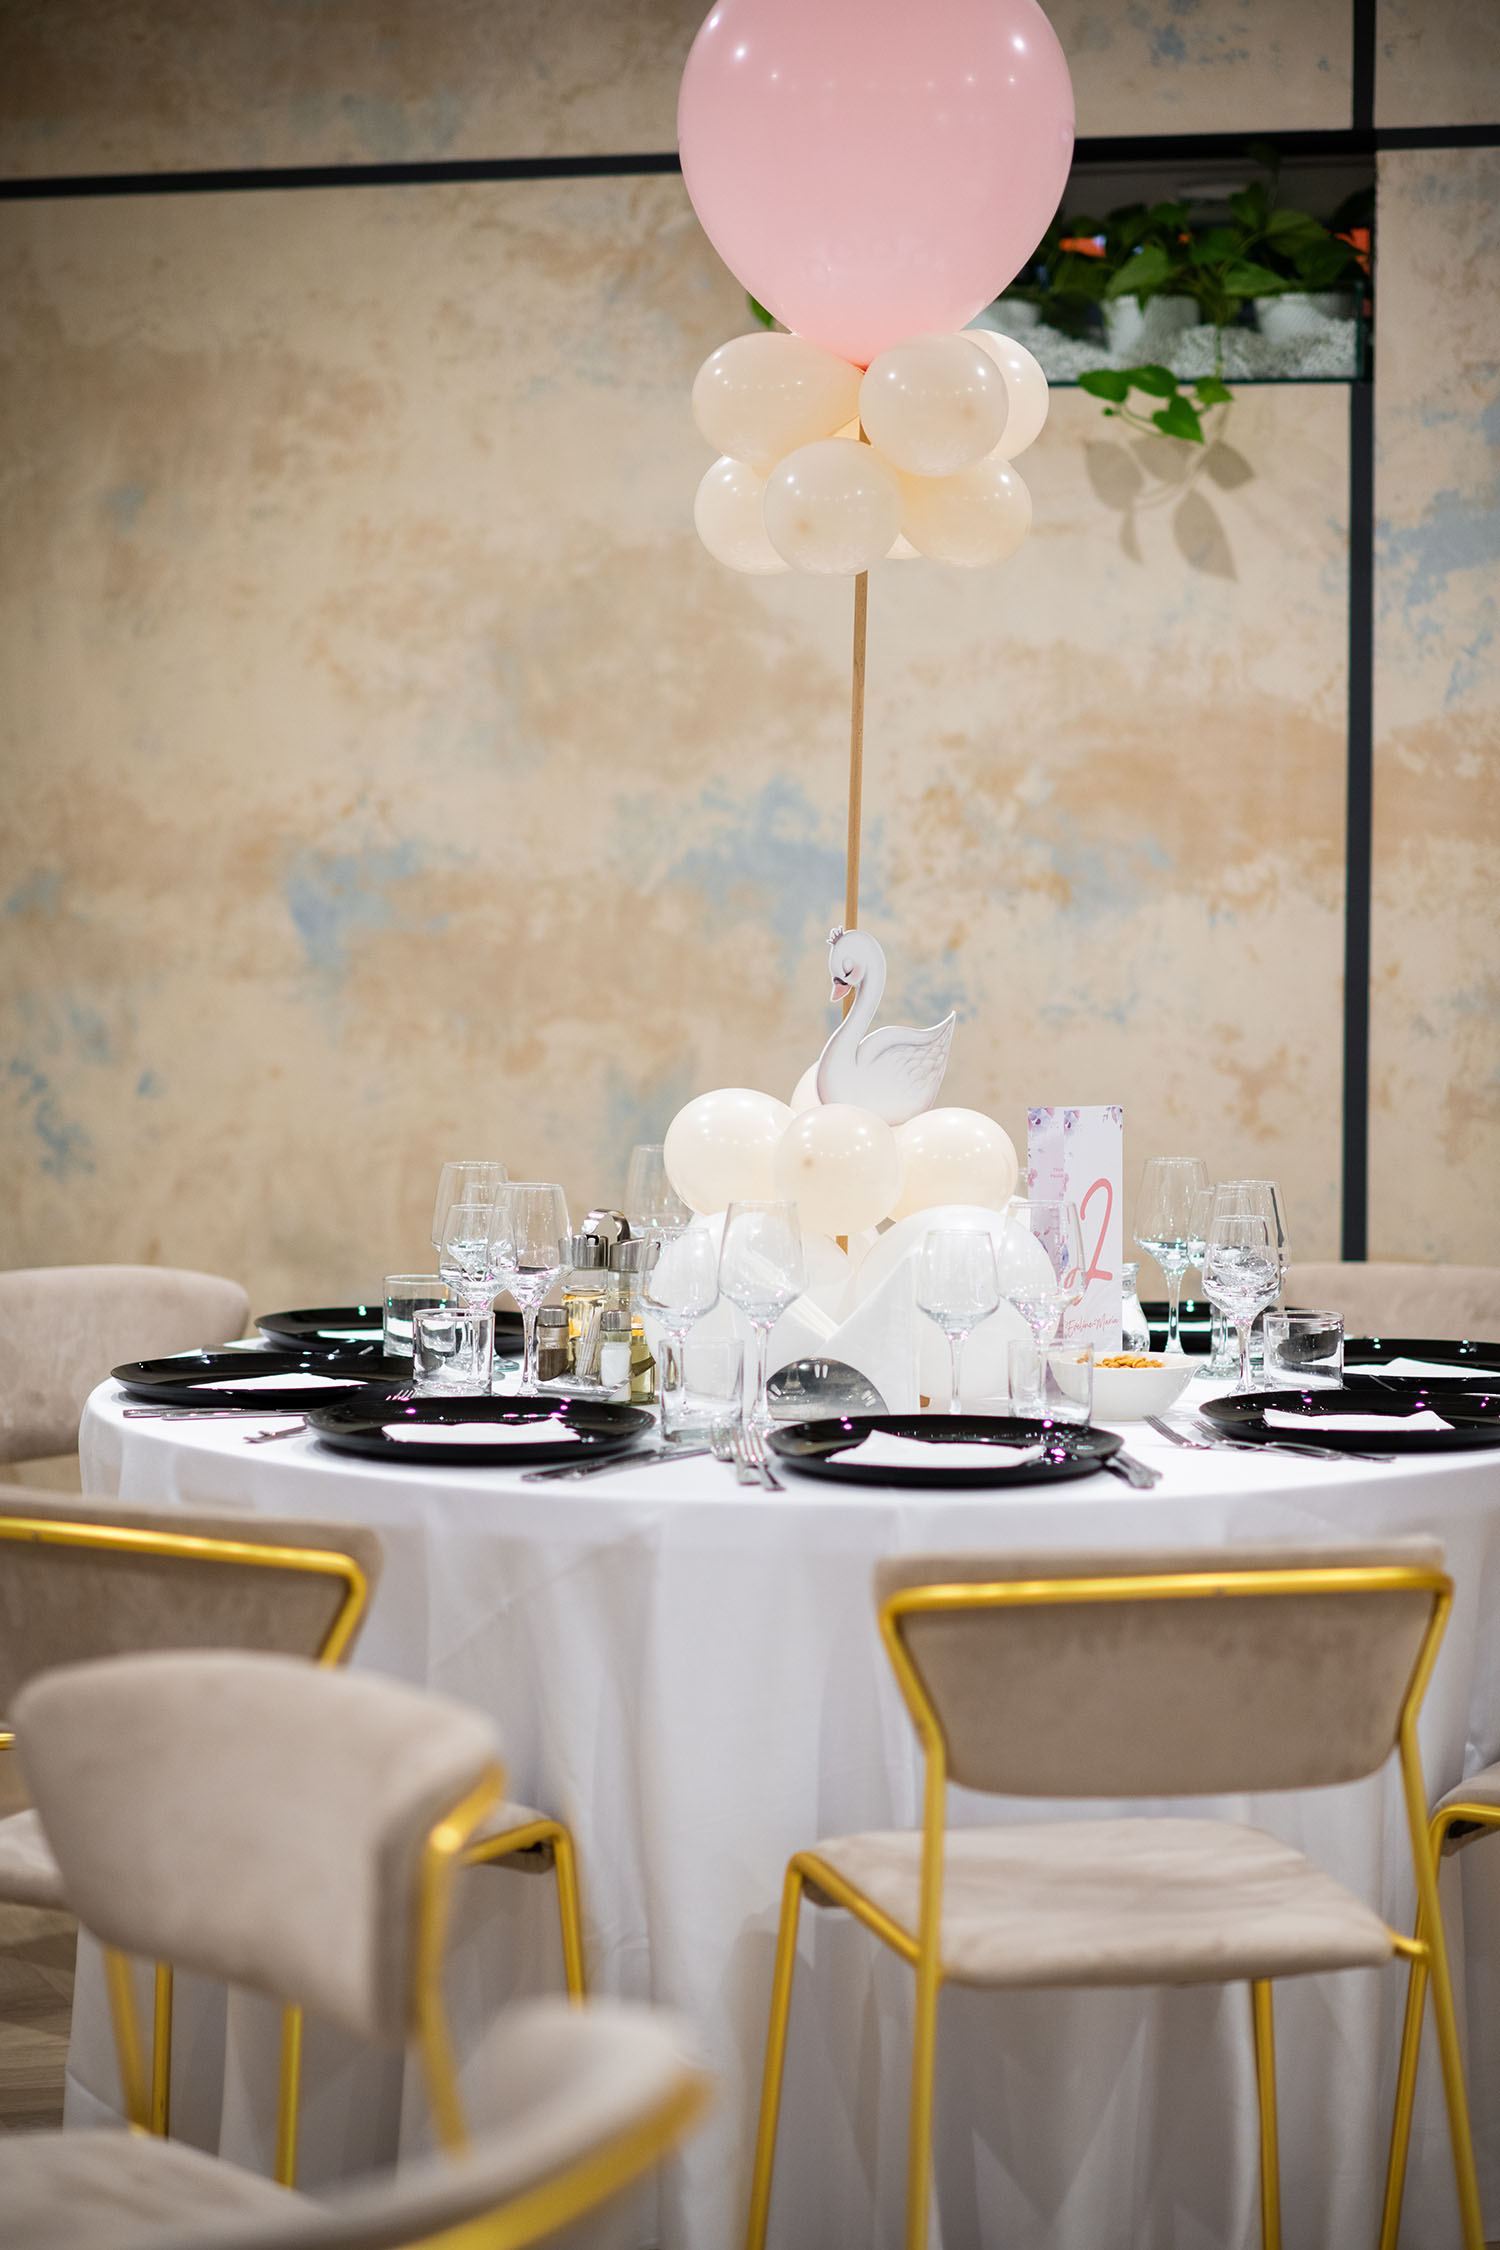 A table setting with white tablecloth at an epic event.